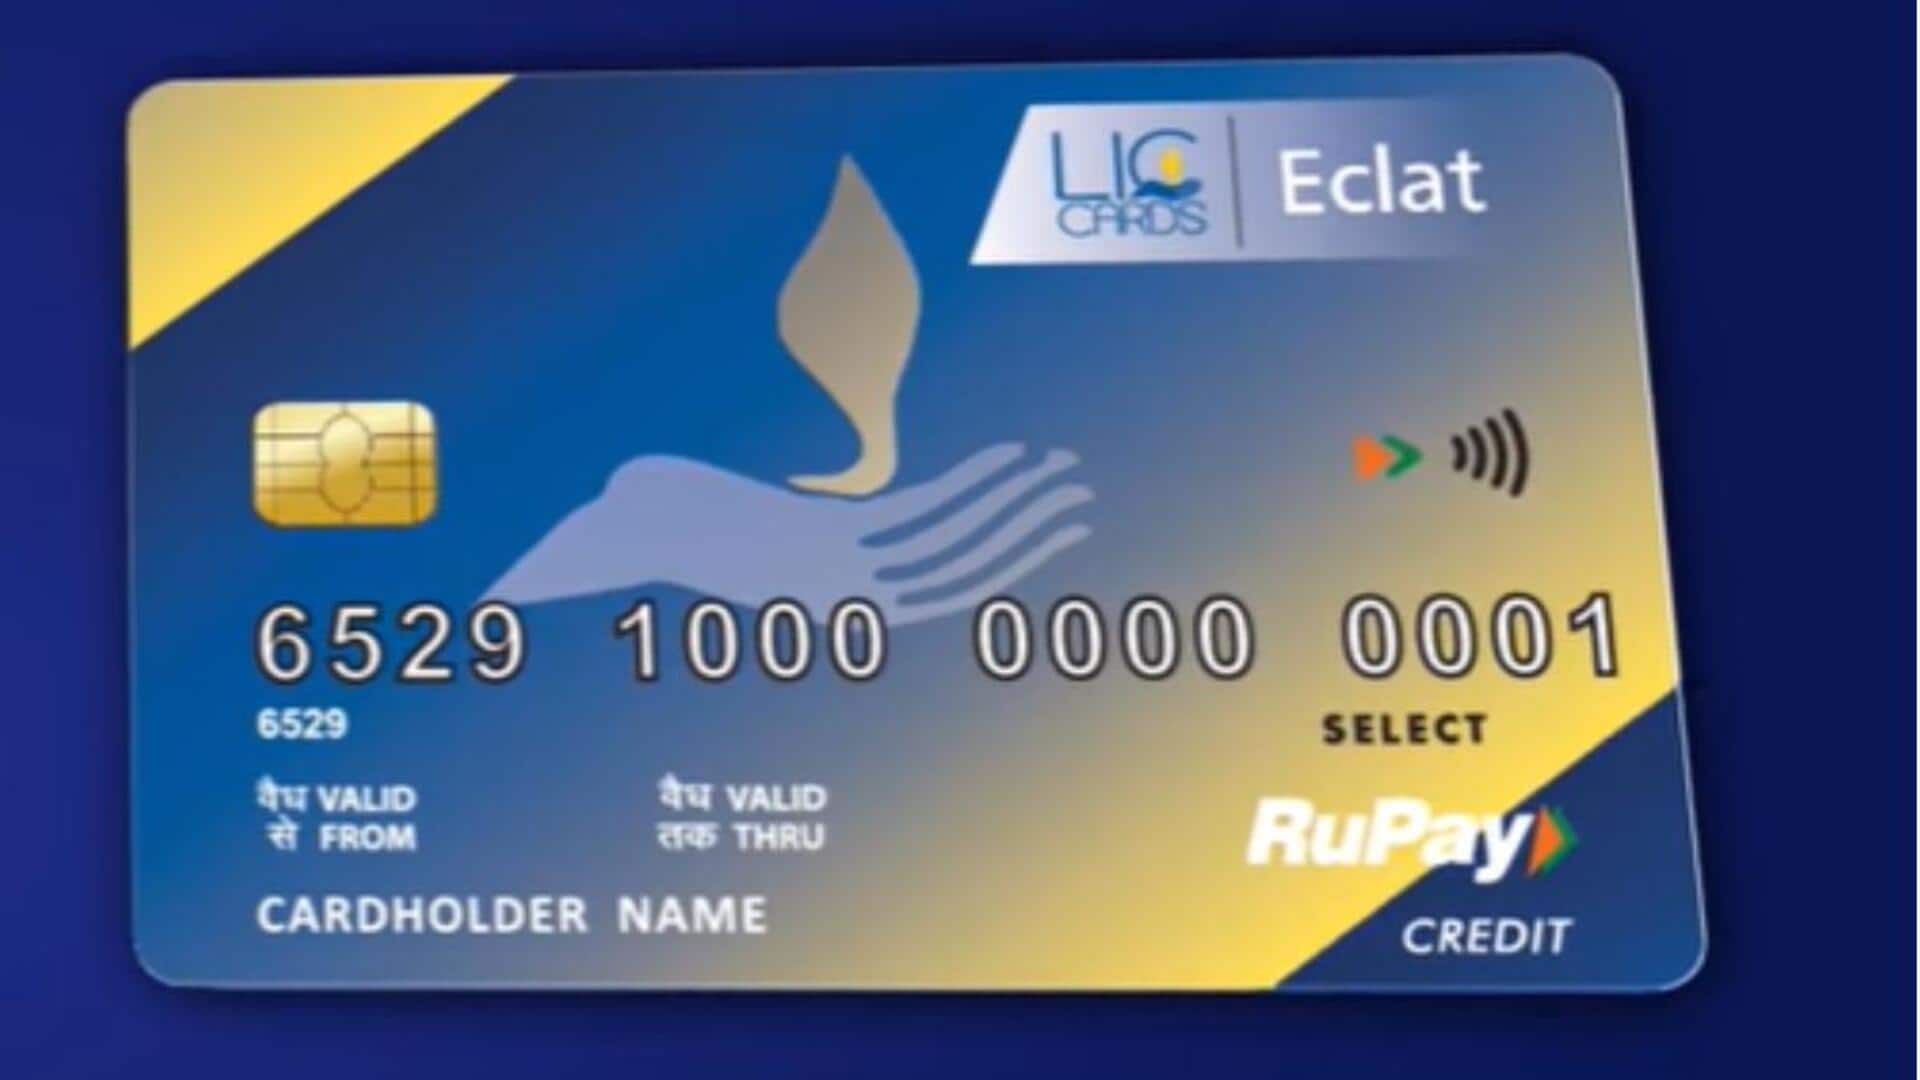 IDFC First Bank to launch LIC co-branded credit card